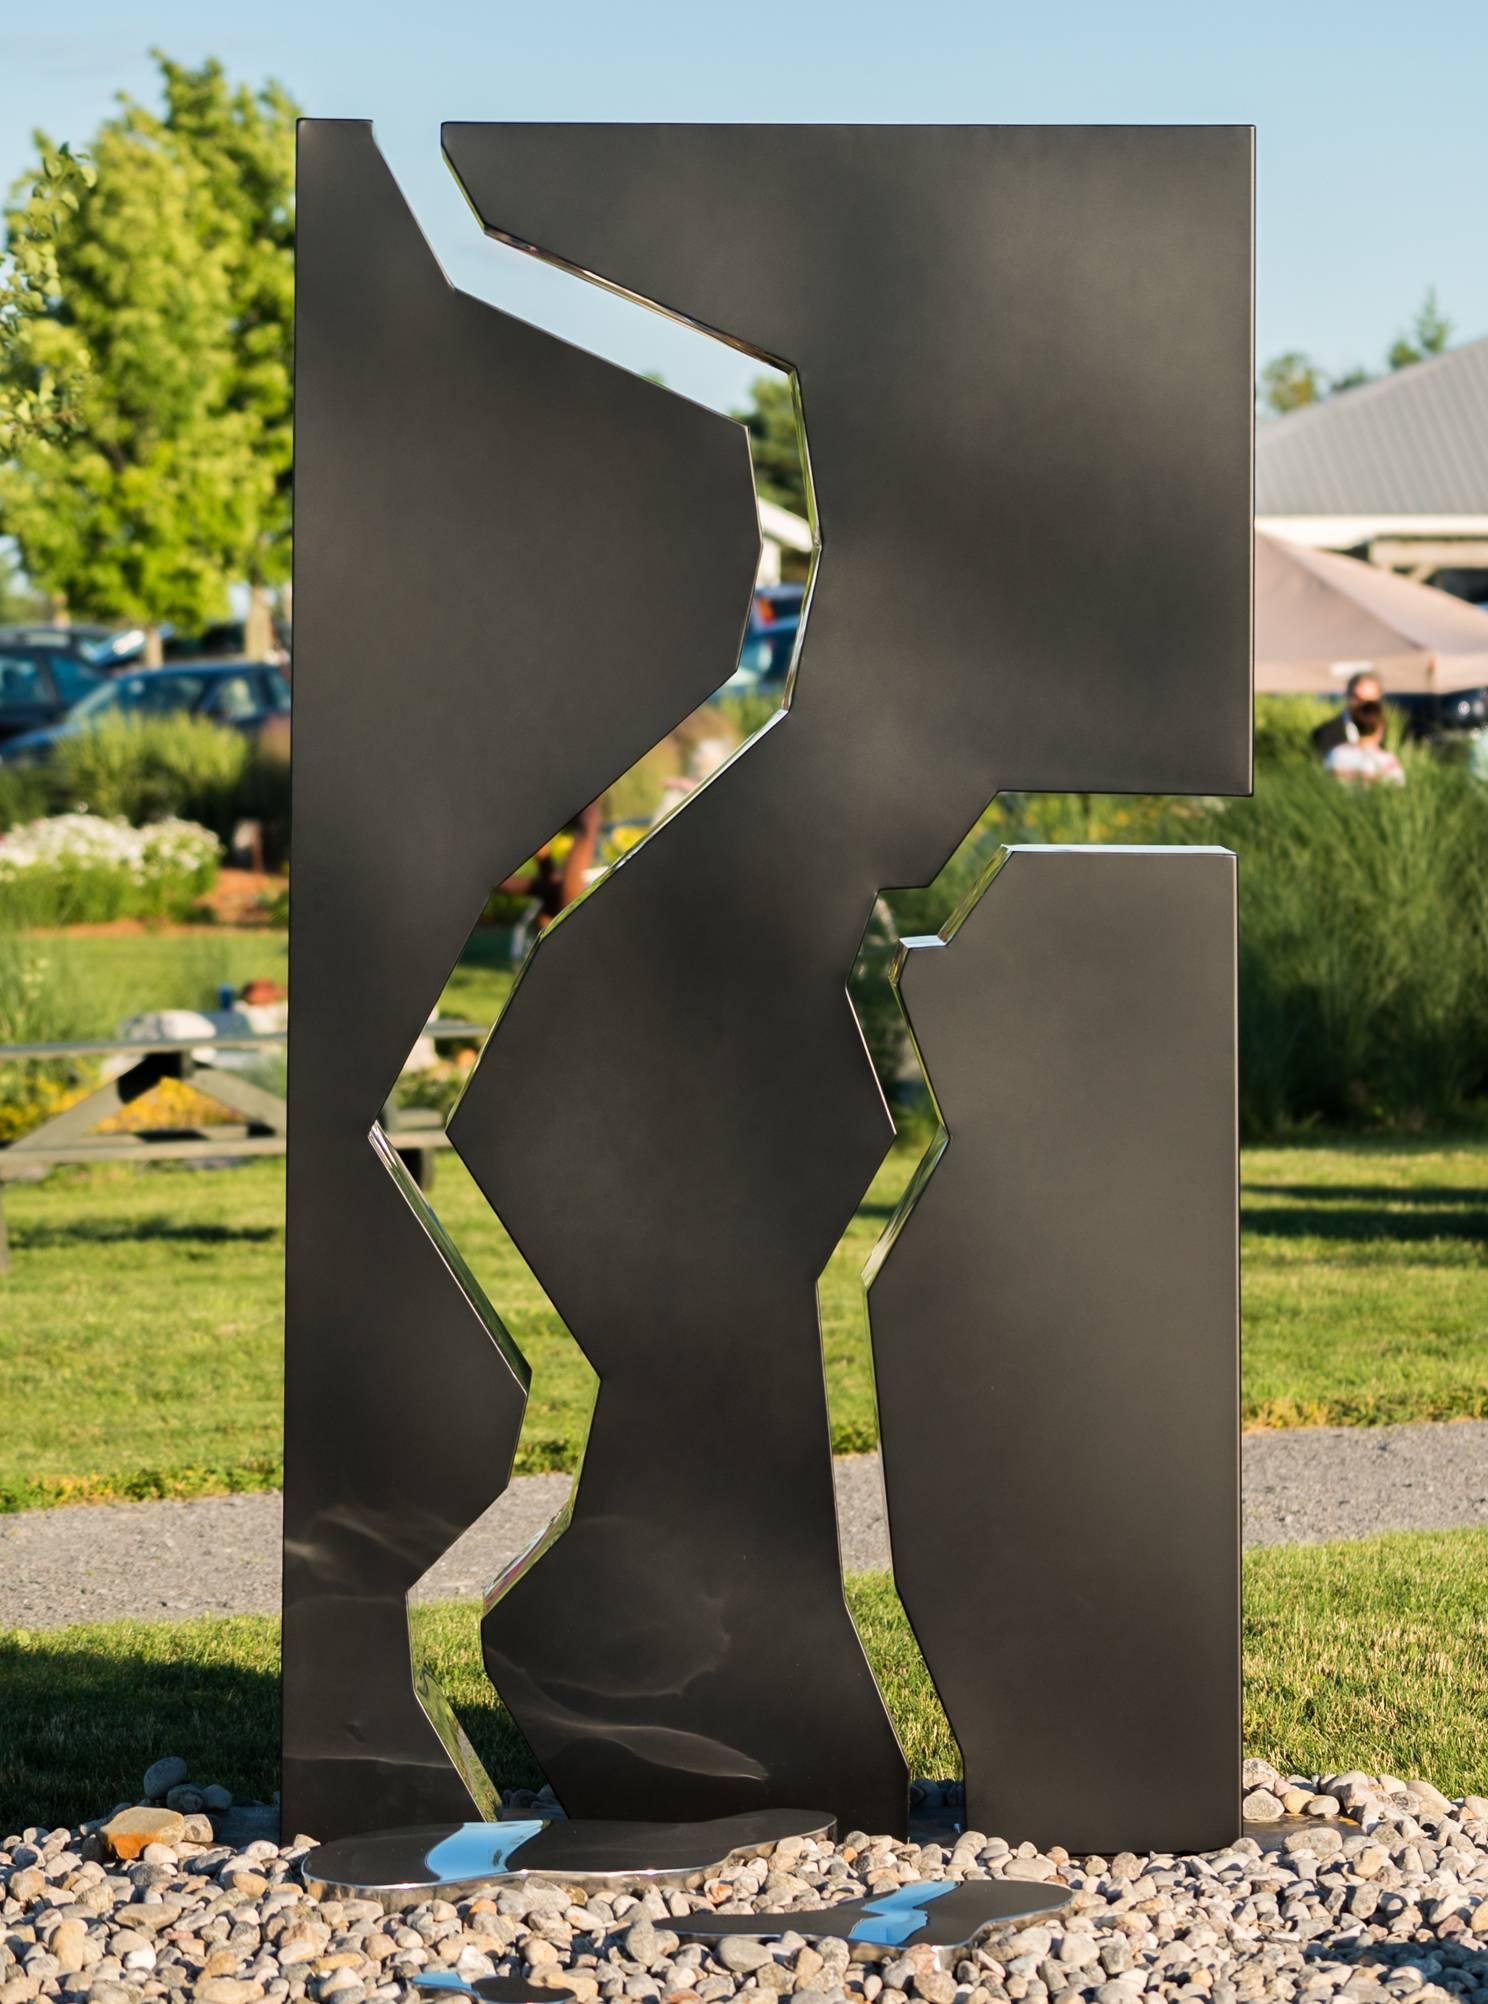 Aquagraphie Variation 2 (Water Writing) - abstract, outdoor steel sculpture - Sculpture by Philippe Pallafray